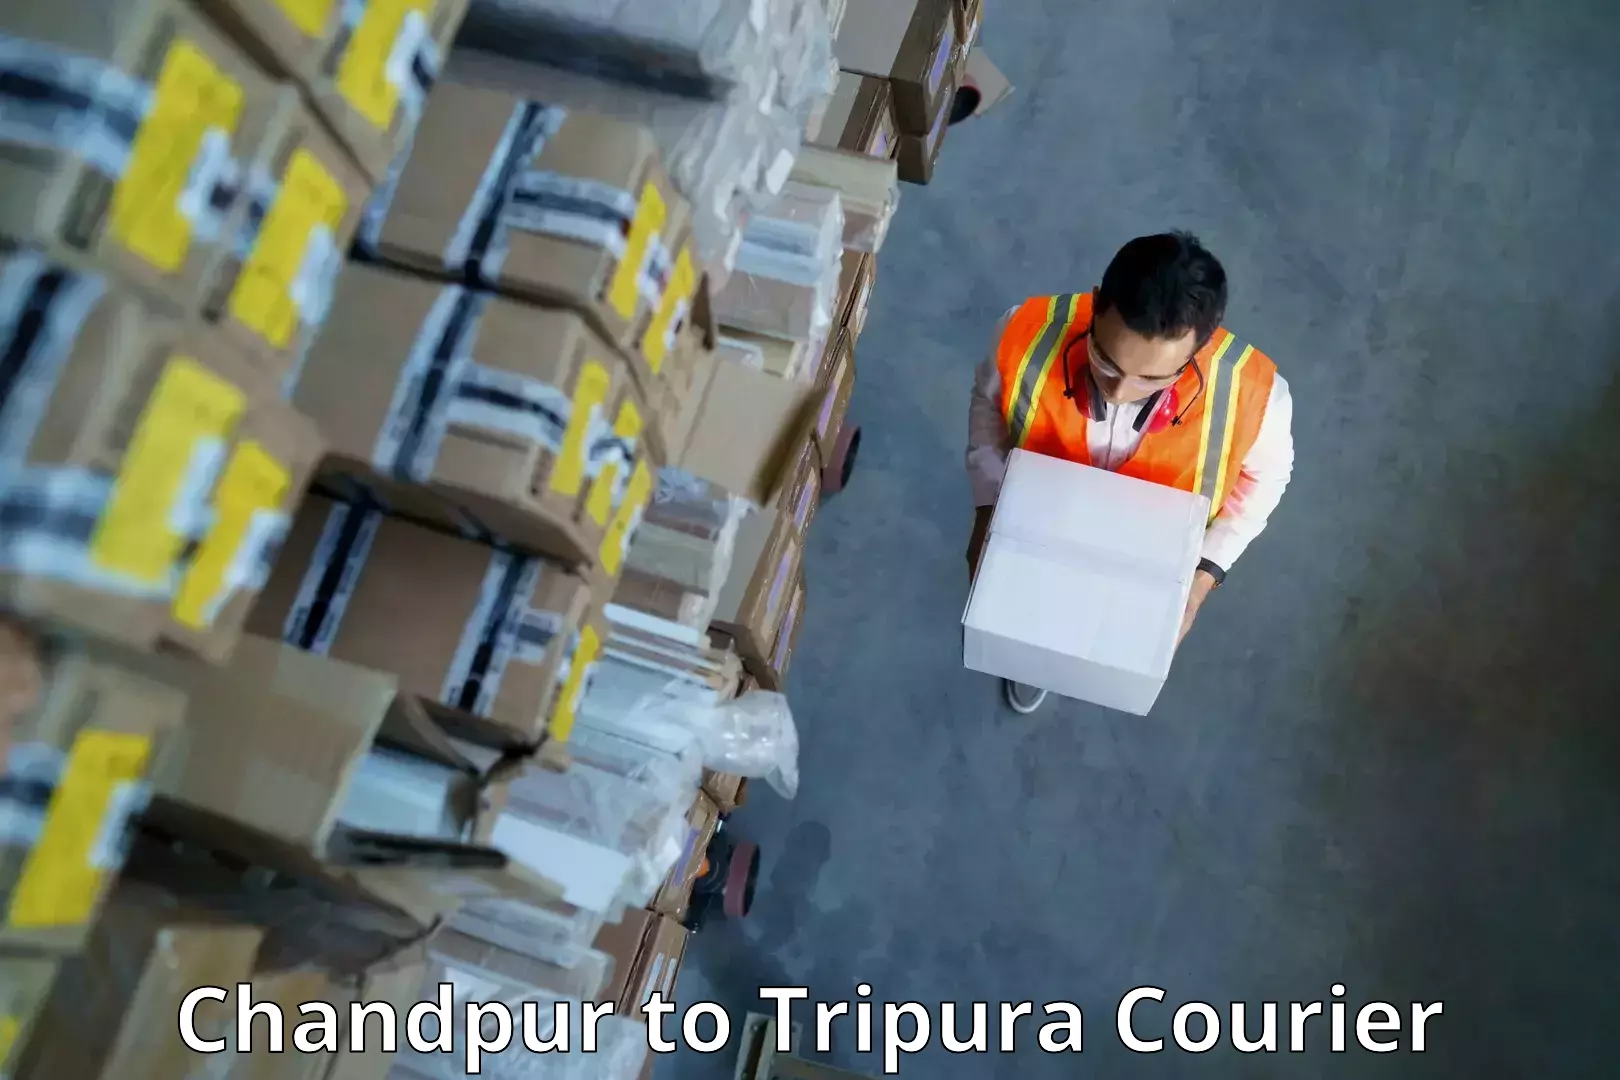 Express delivery capabilities Chandpur to Agartala